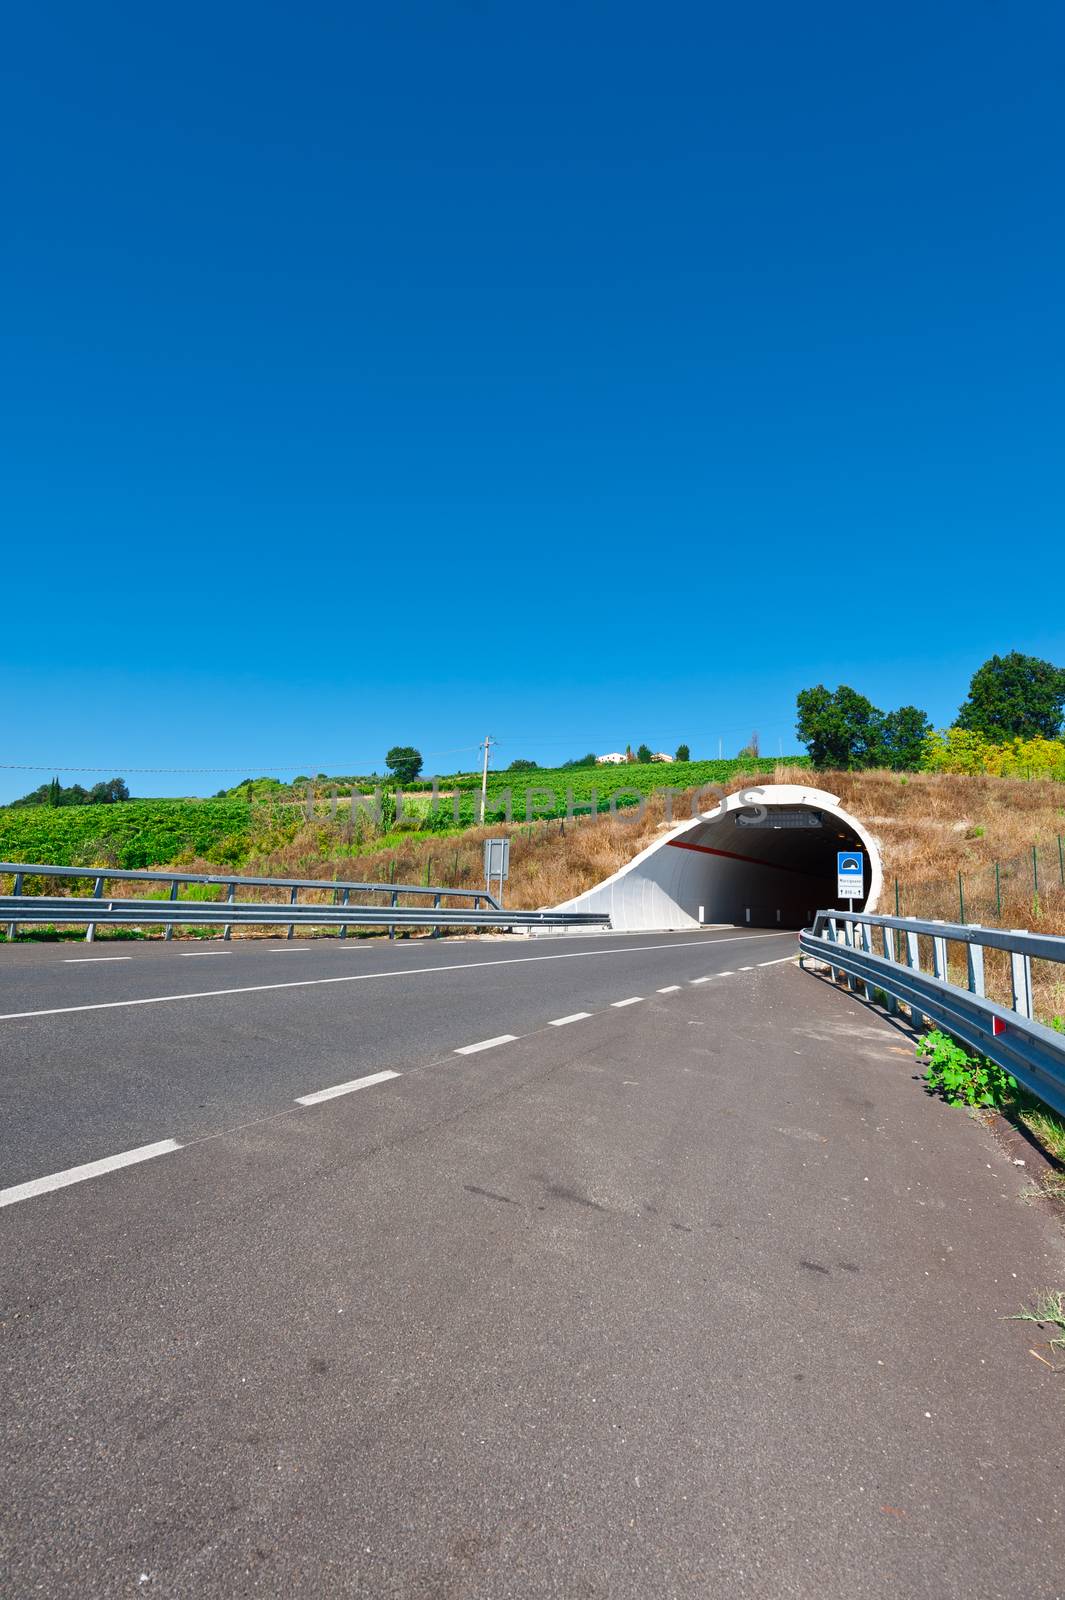 Tunnel under the Vineyard on the Asphalt Road  in Tuscany, Italy